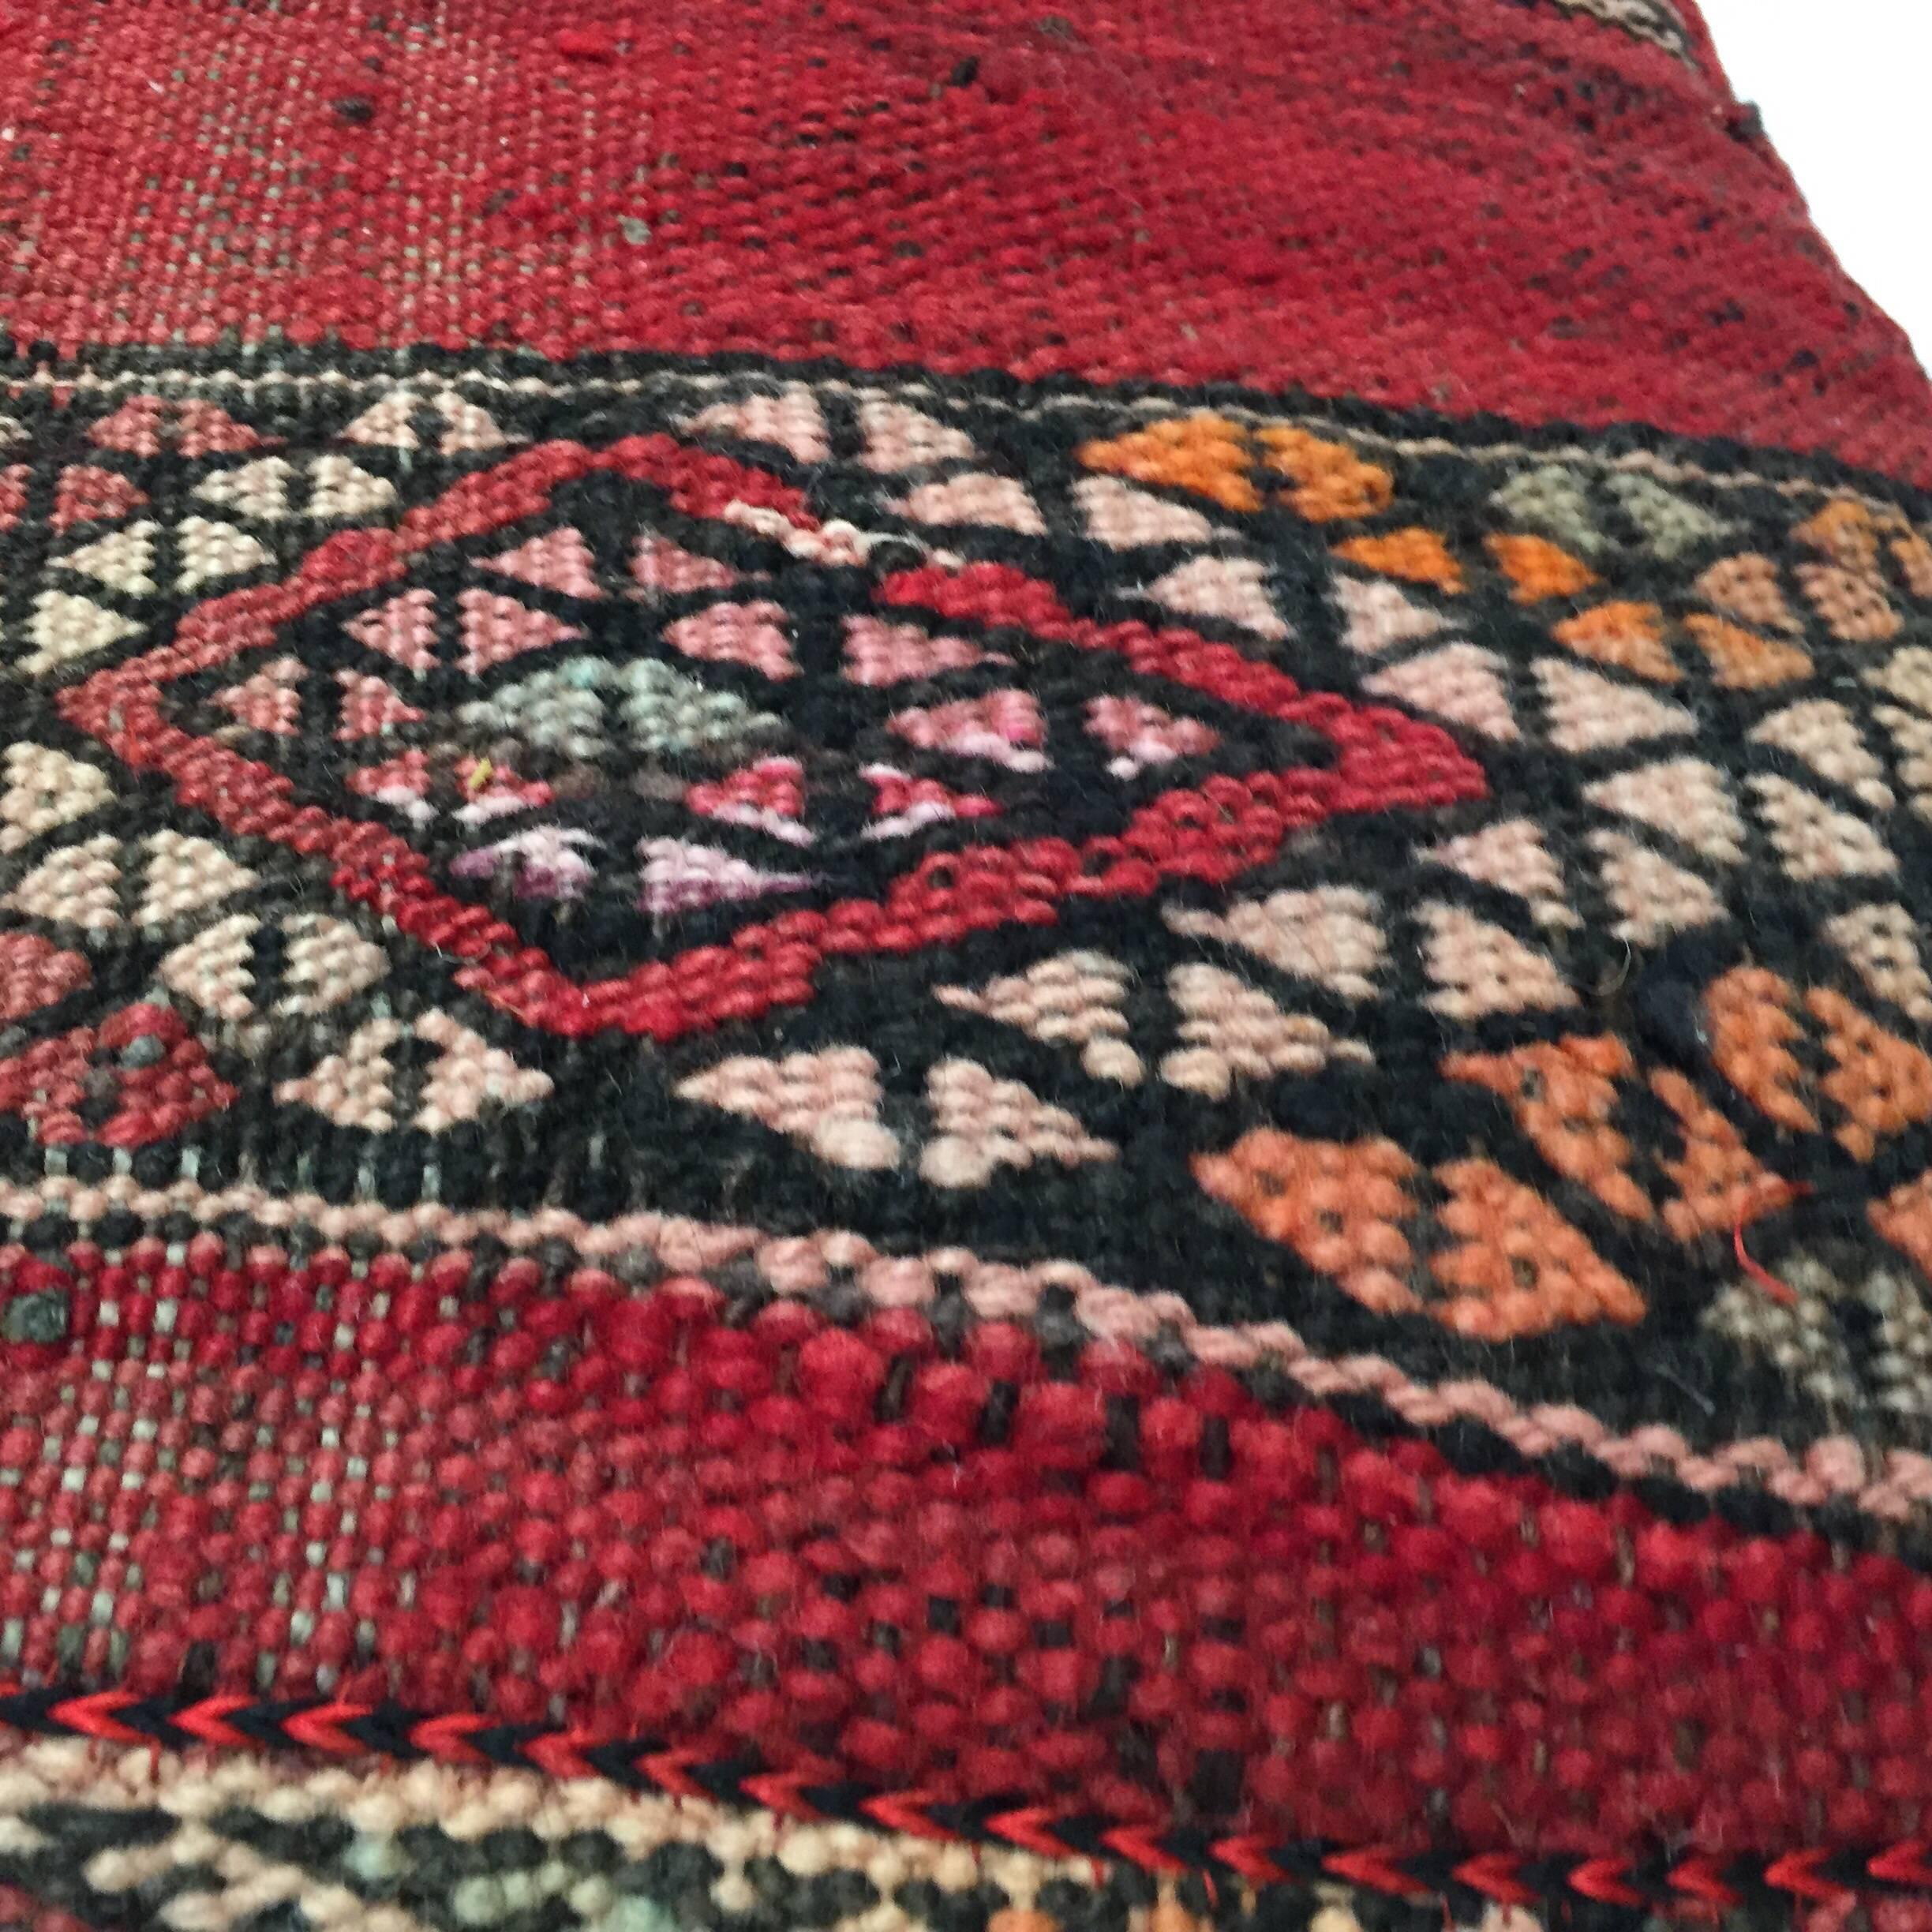 Wool Moroccan Floor Pillow Tribal Seat Cushion Made from a Vintage Berber Rug